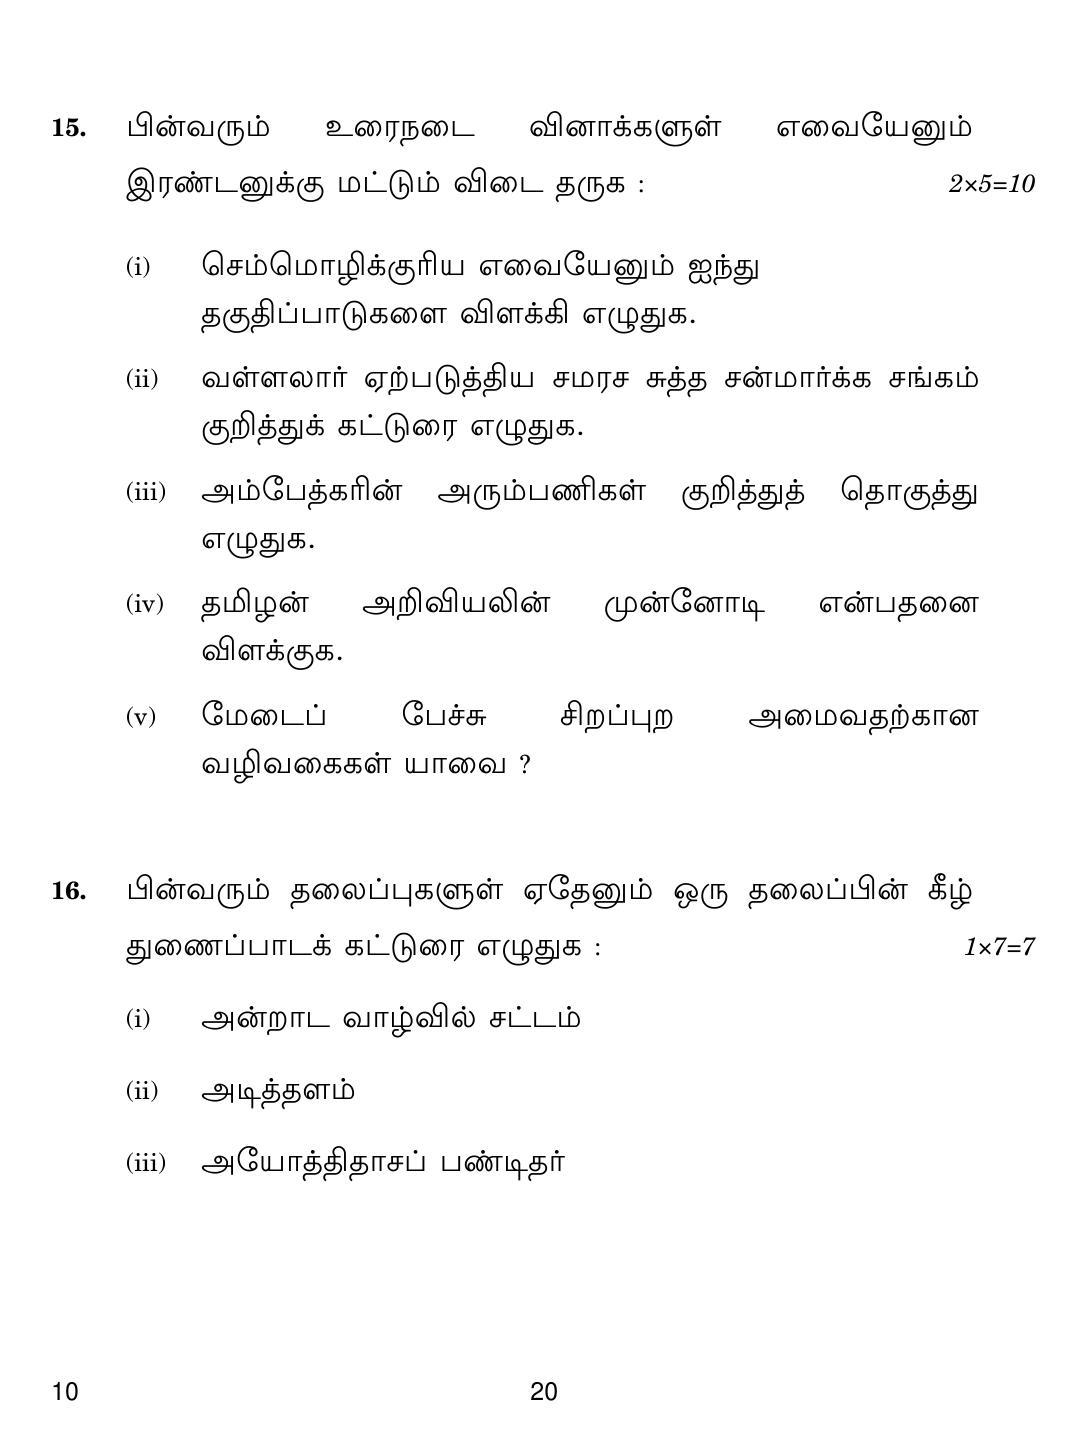 CBSE Class 10 10 Tamil 2019 Question Paper - Page 20